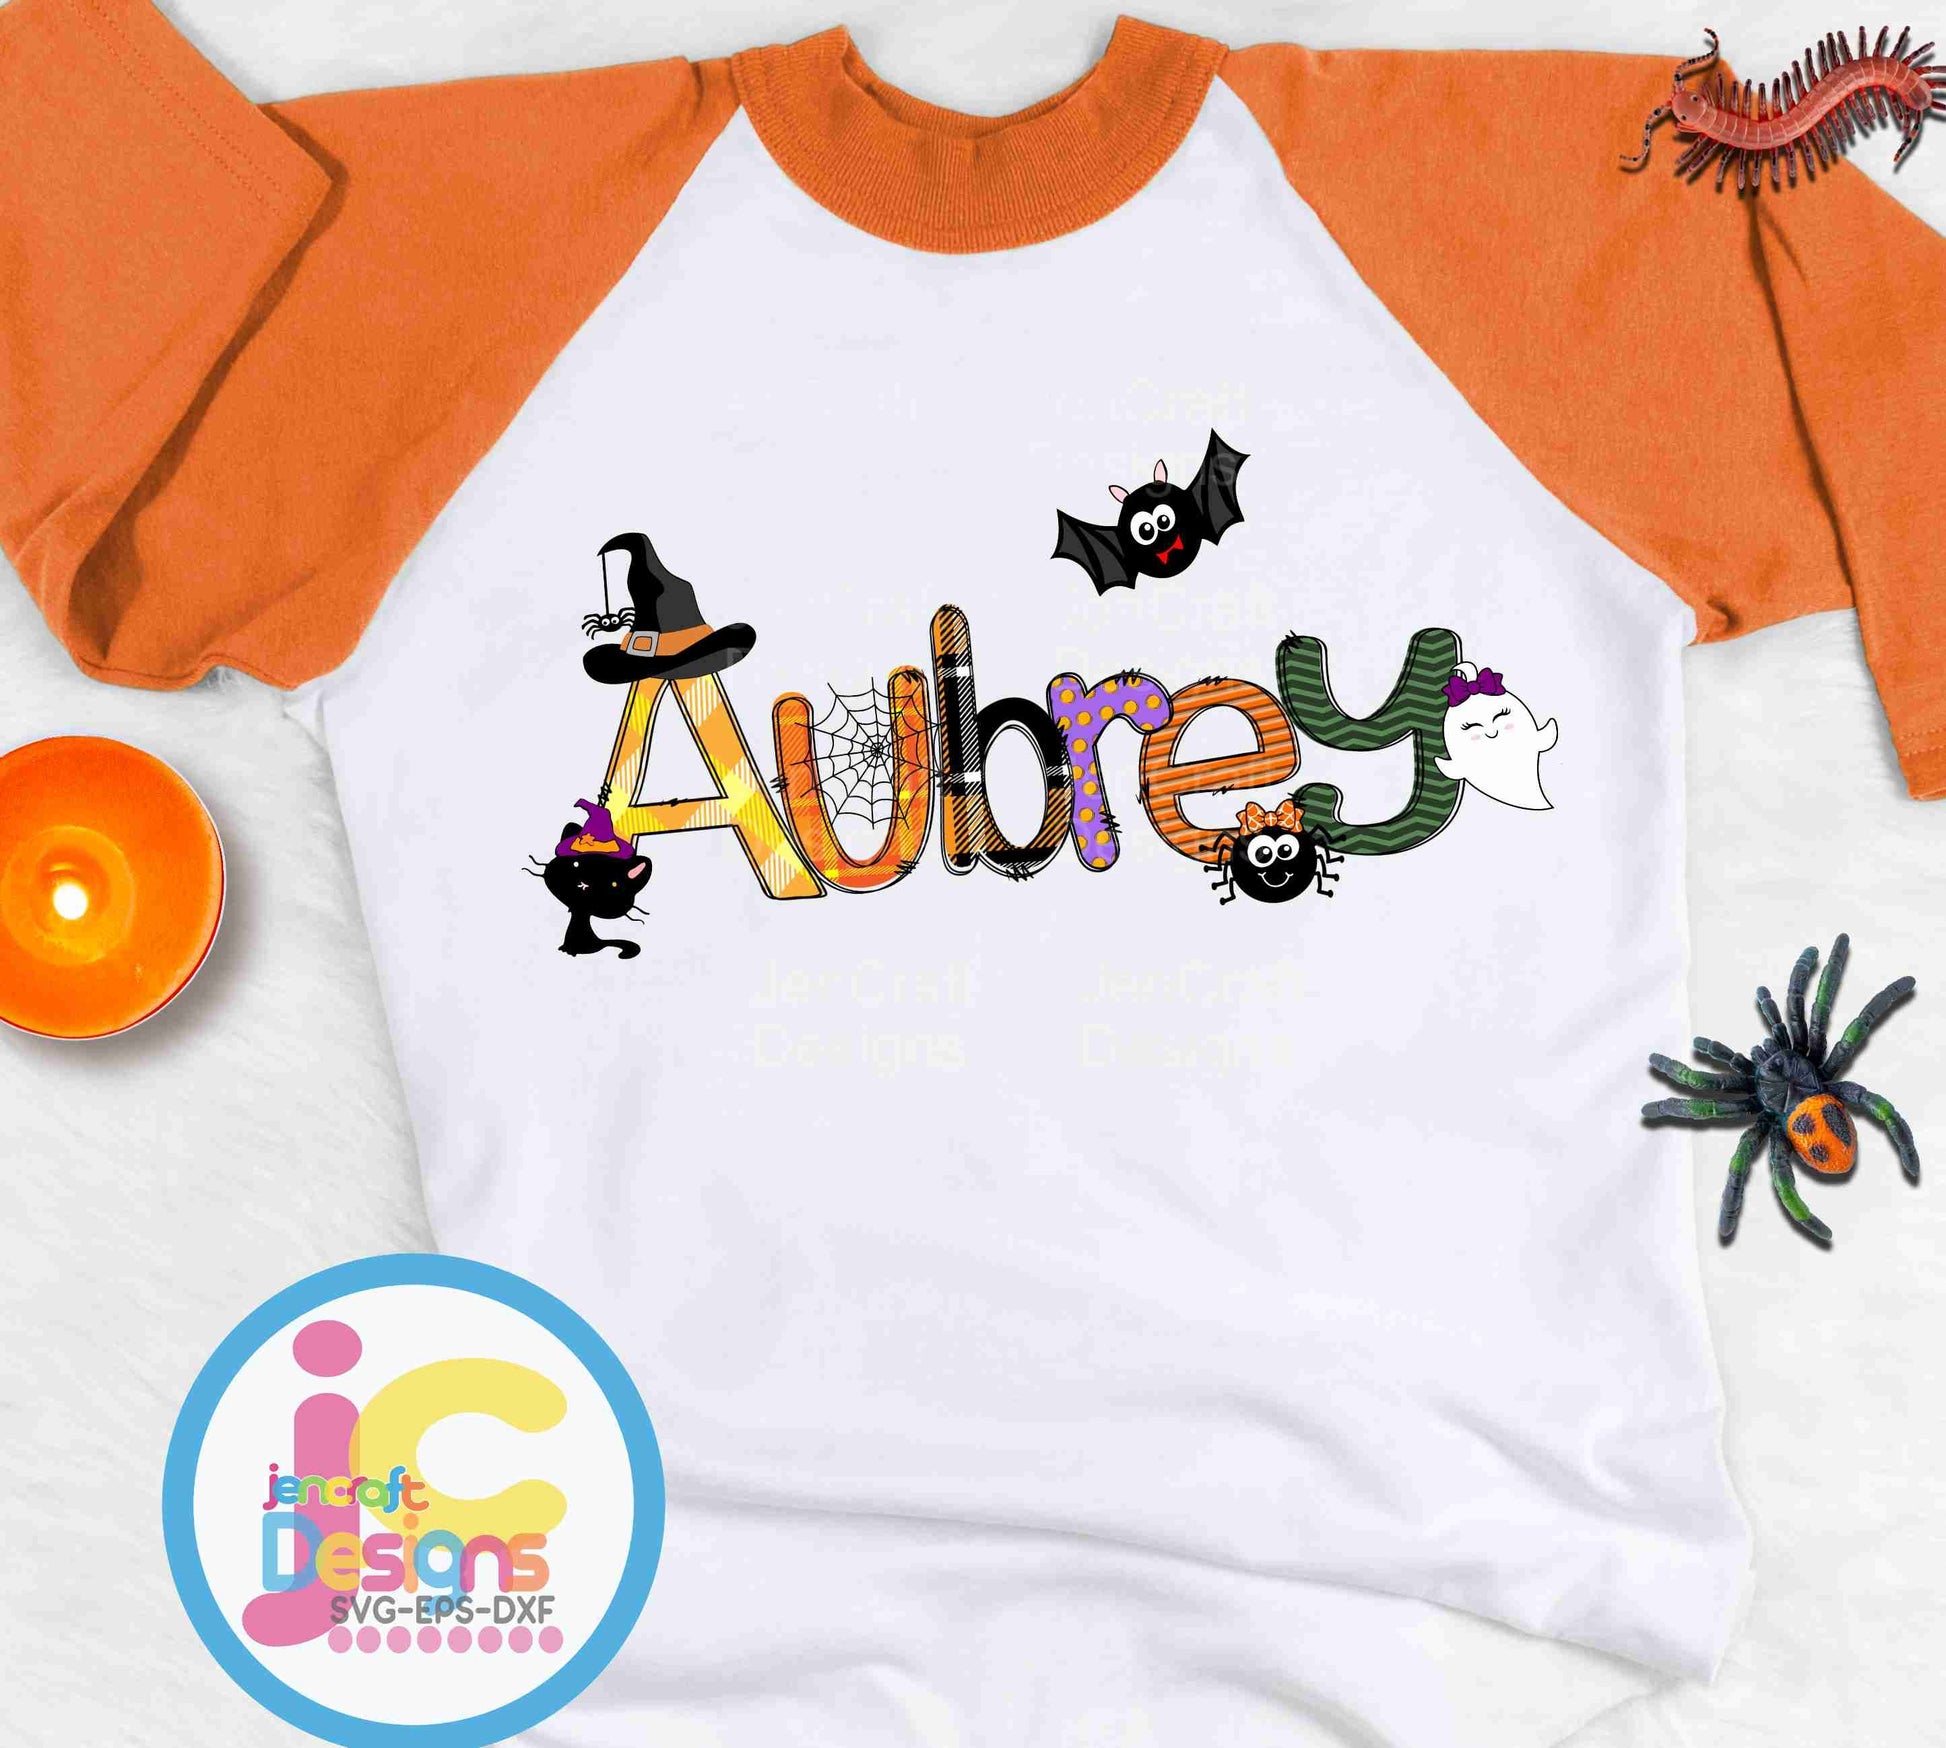 Cute Halloween Doodle Letters Alphabet Png Print File for Sublimation or Printing - JenCraft Designs